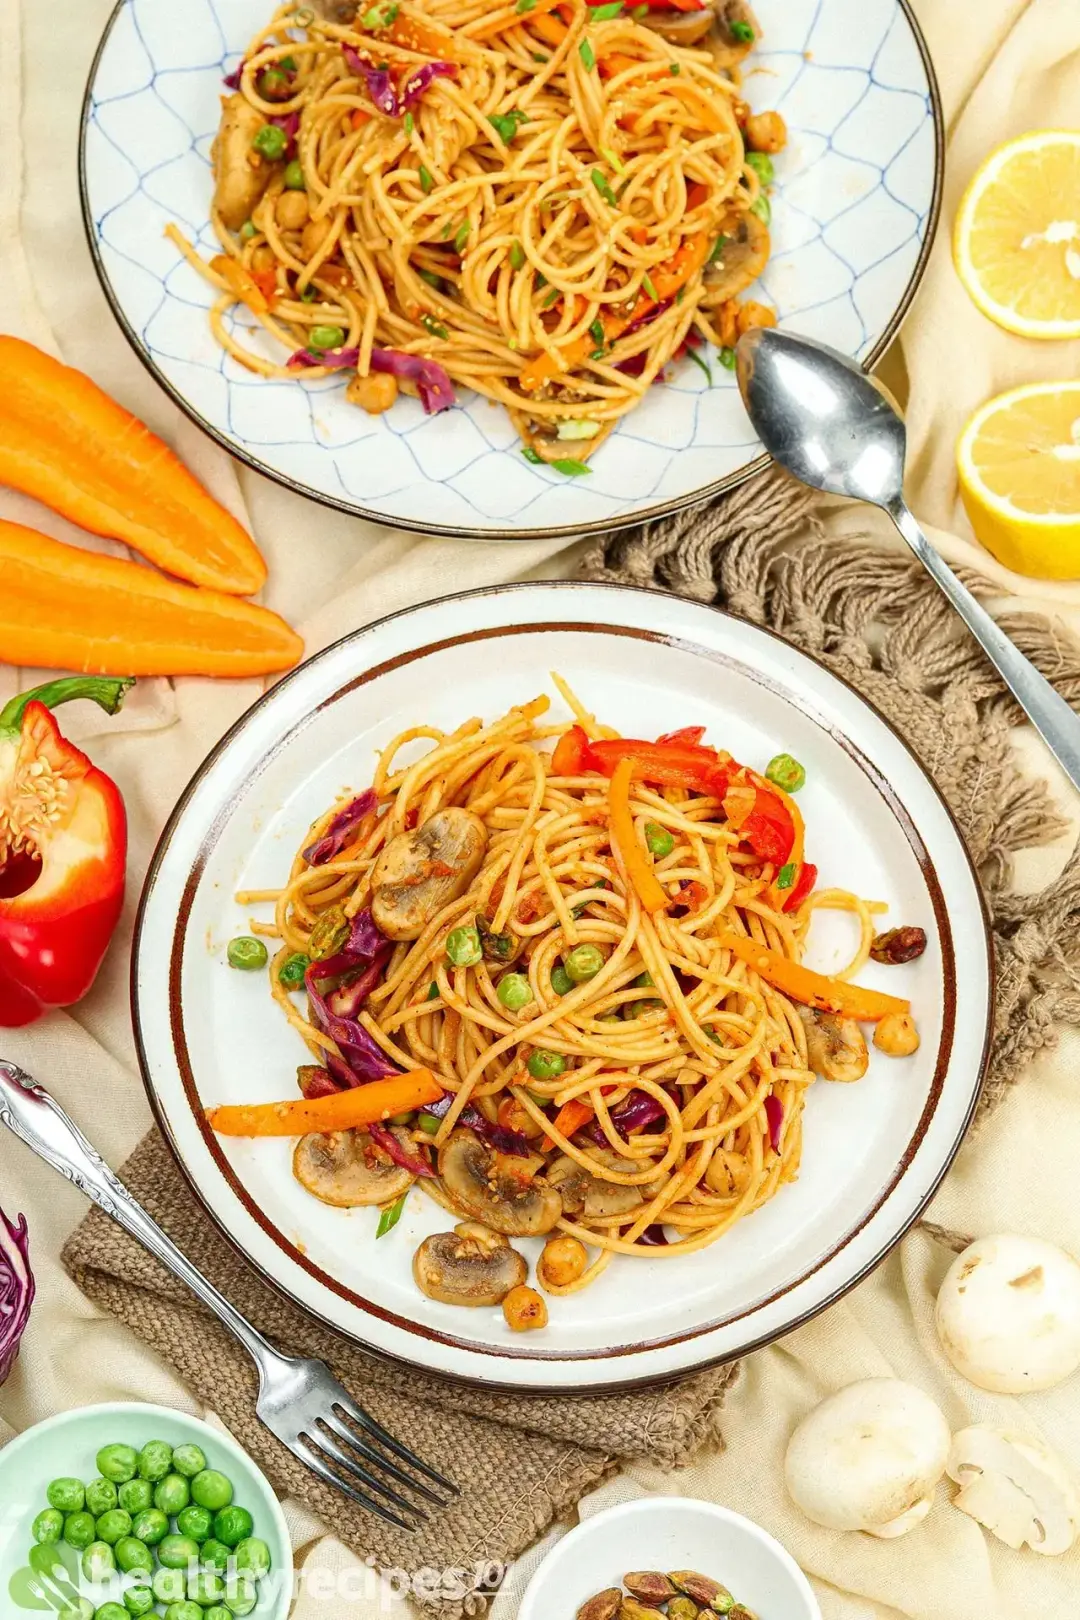 What to Serve With Vegan Spaghetti